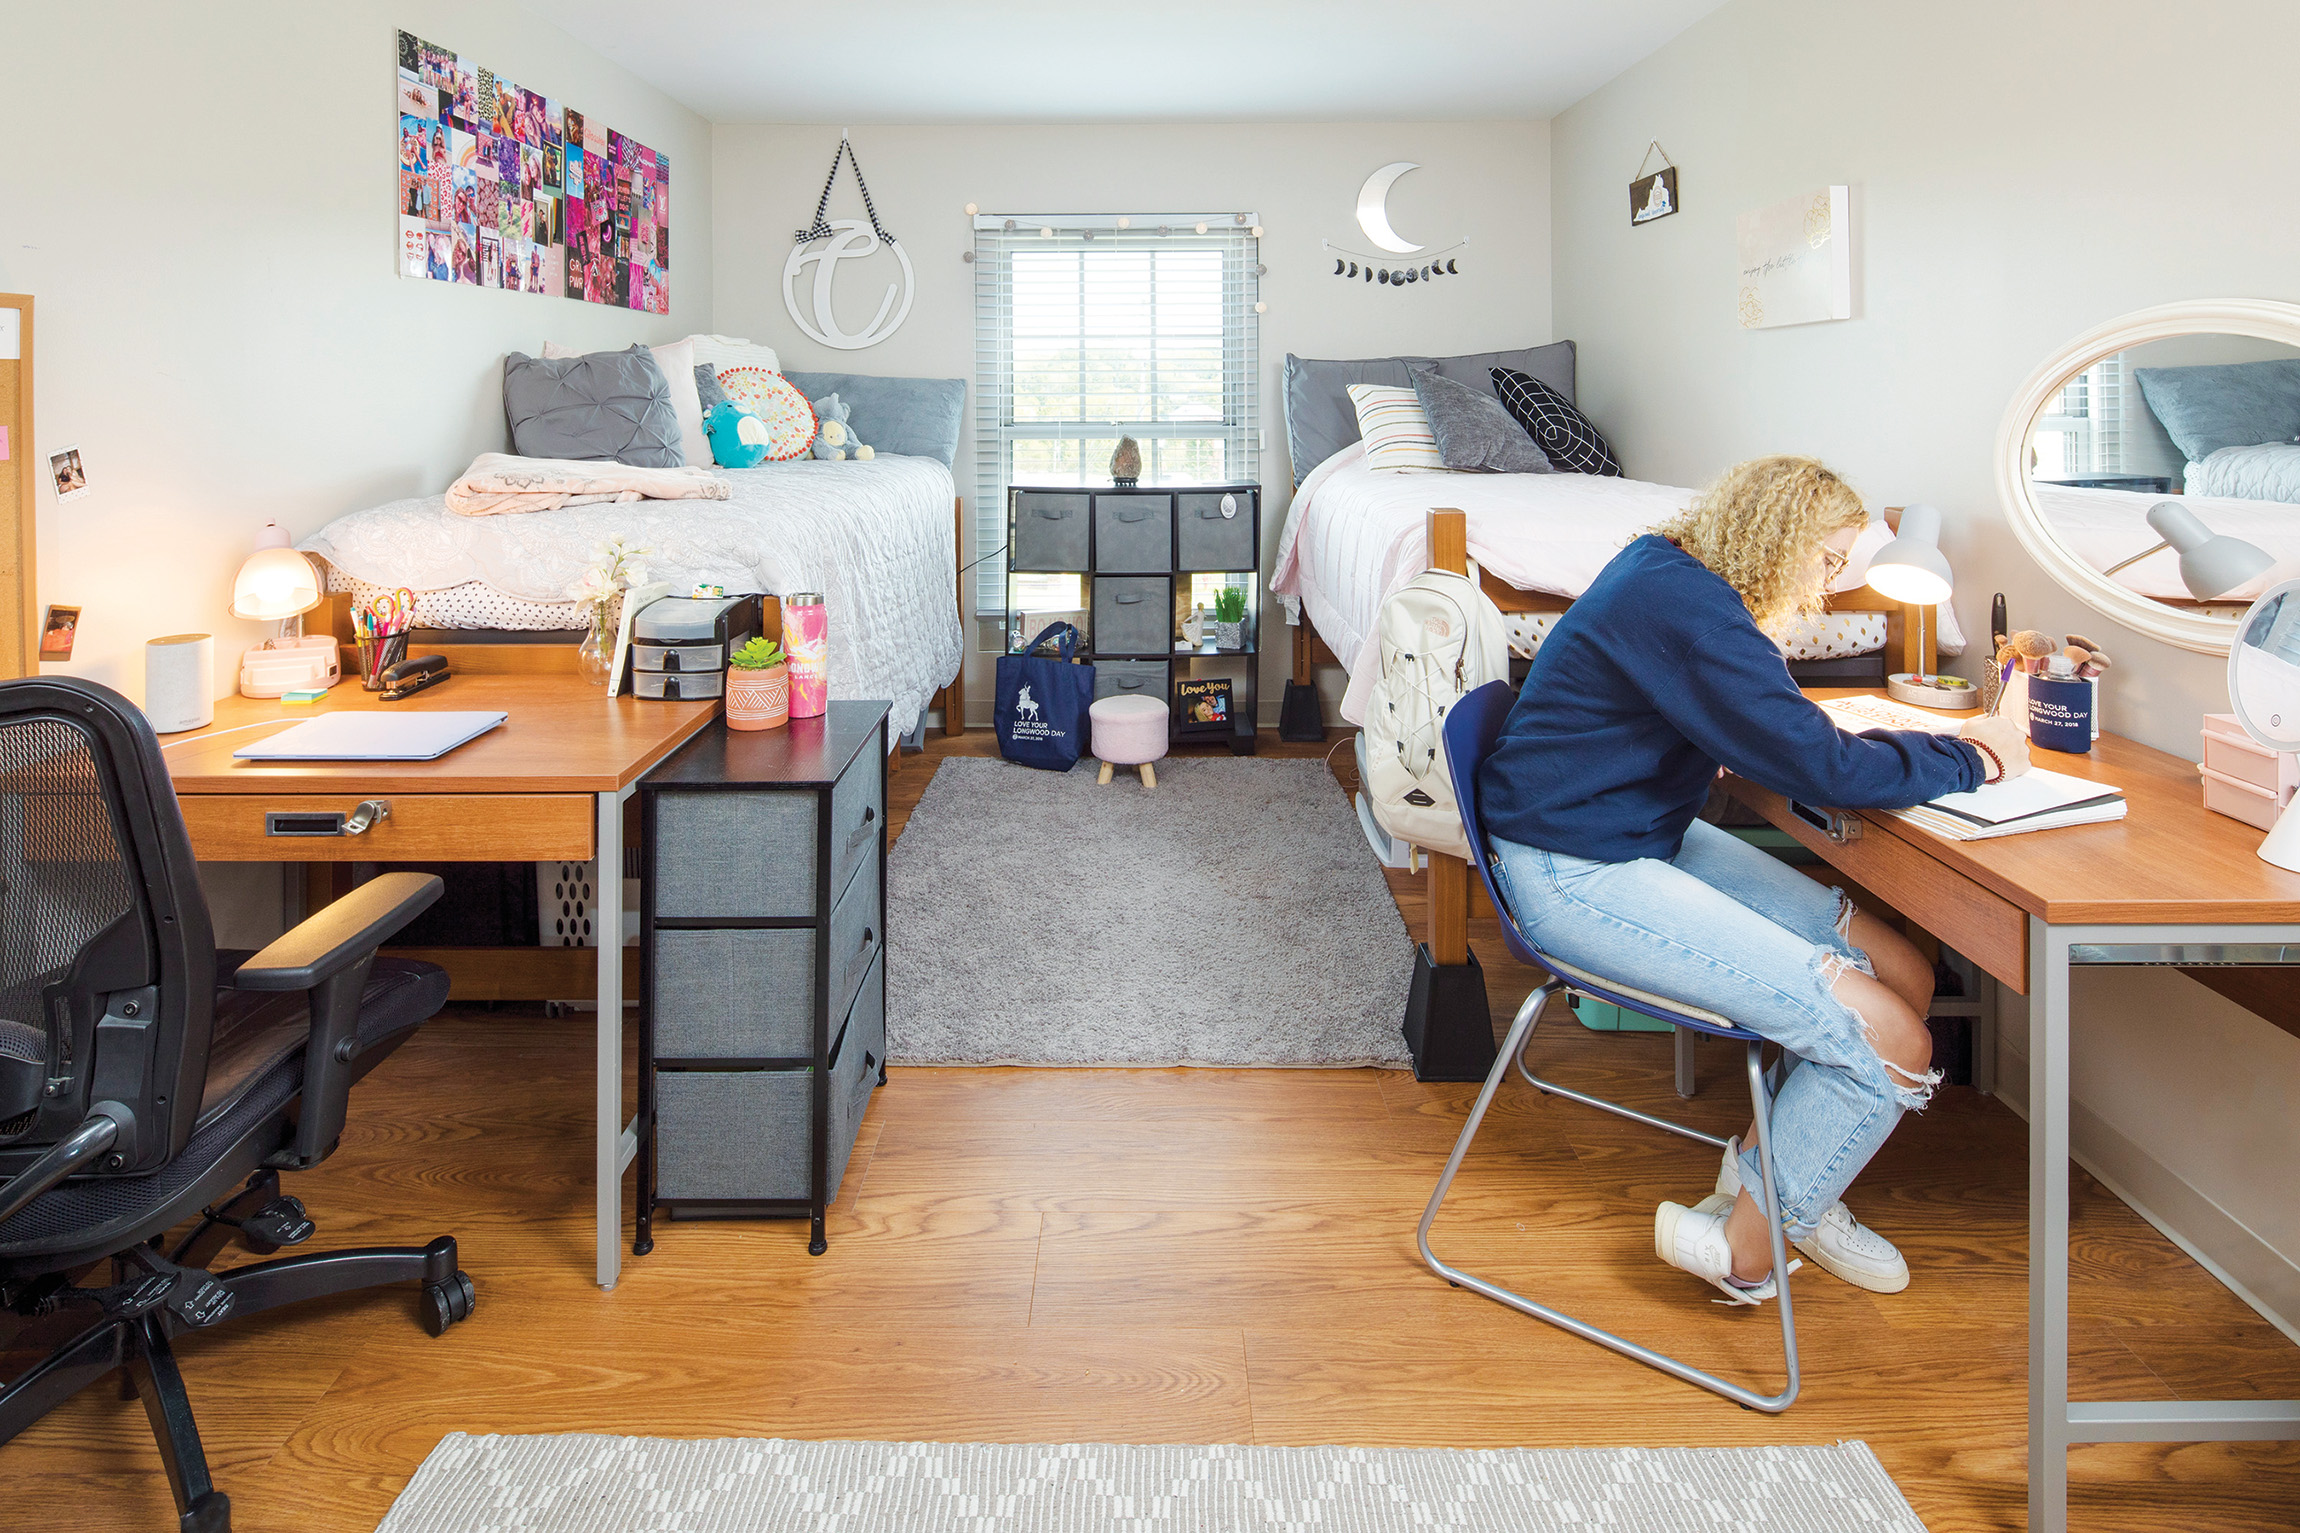 Interior dorm room with woman at desk